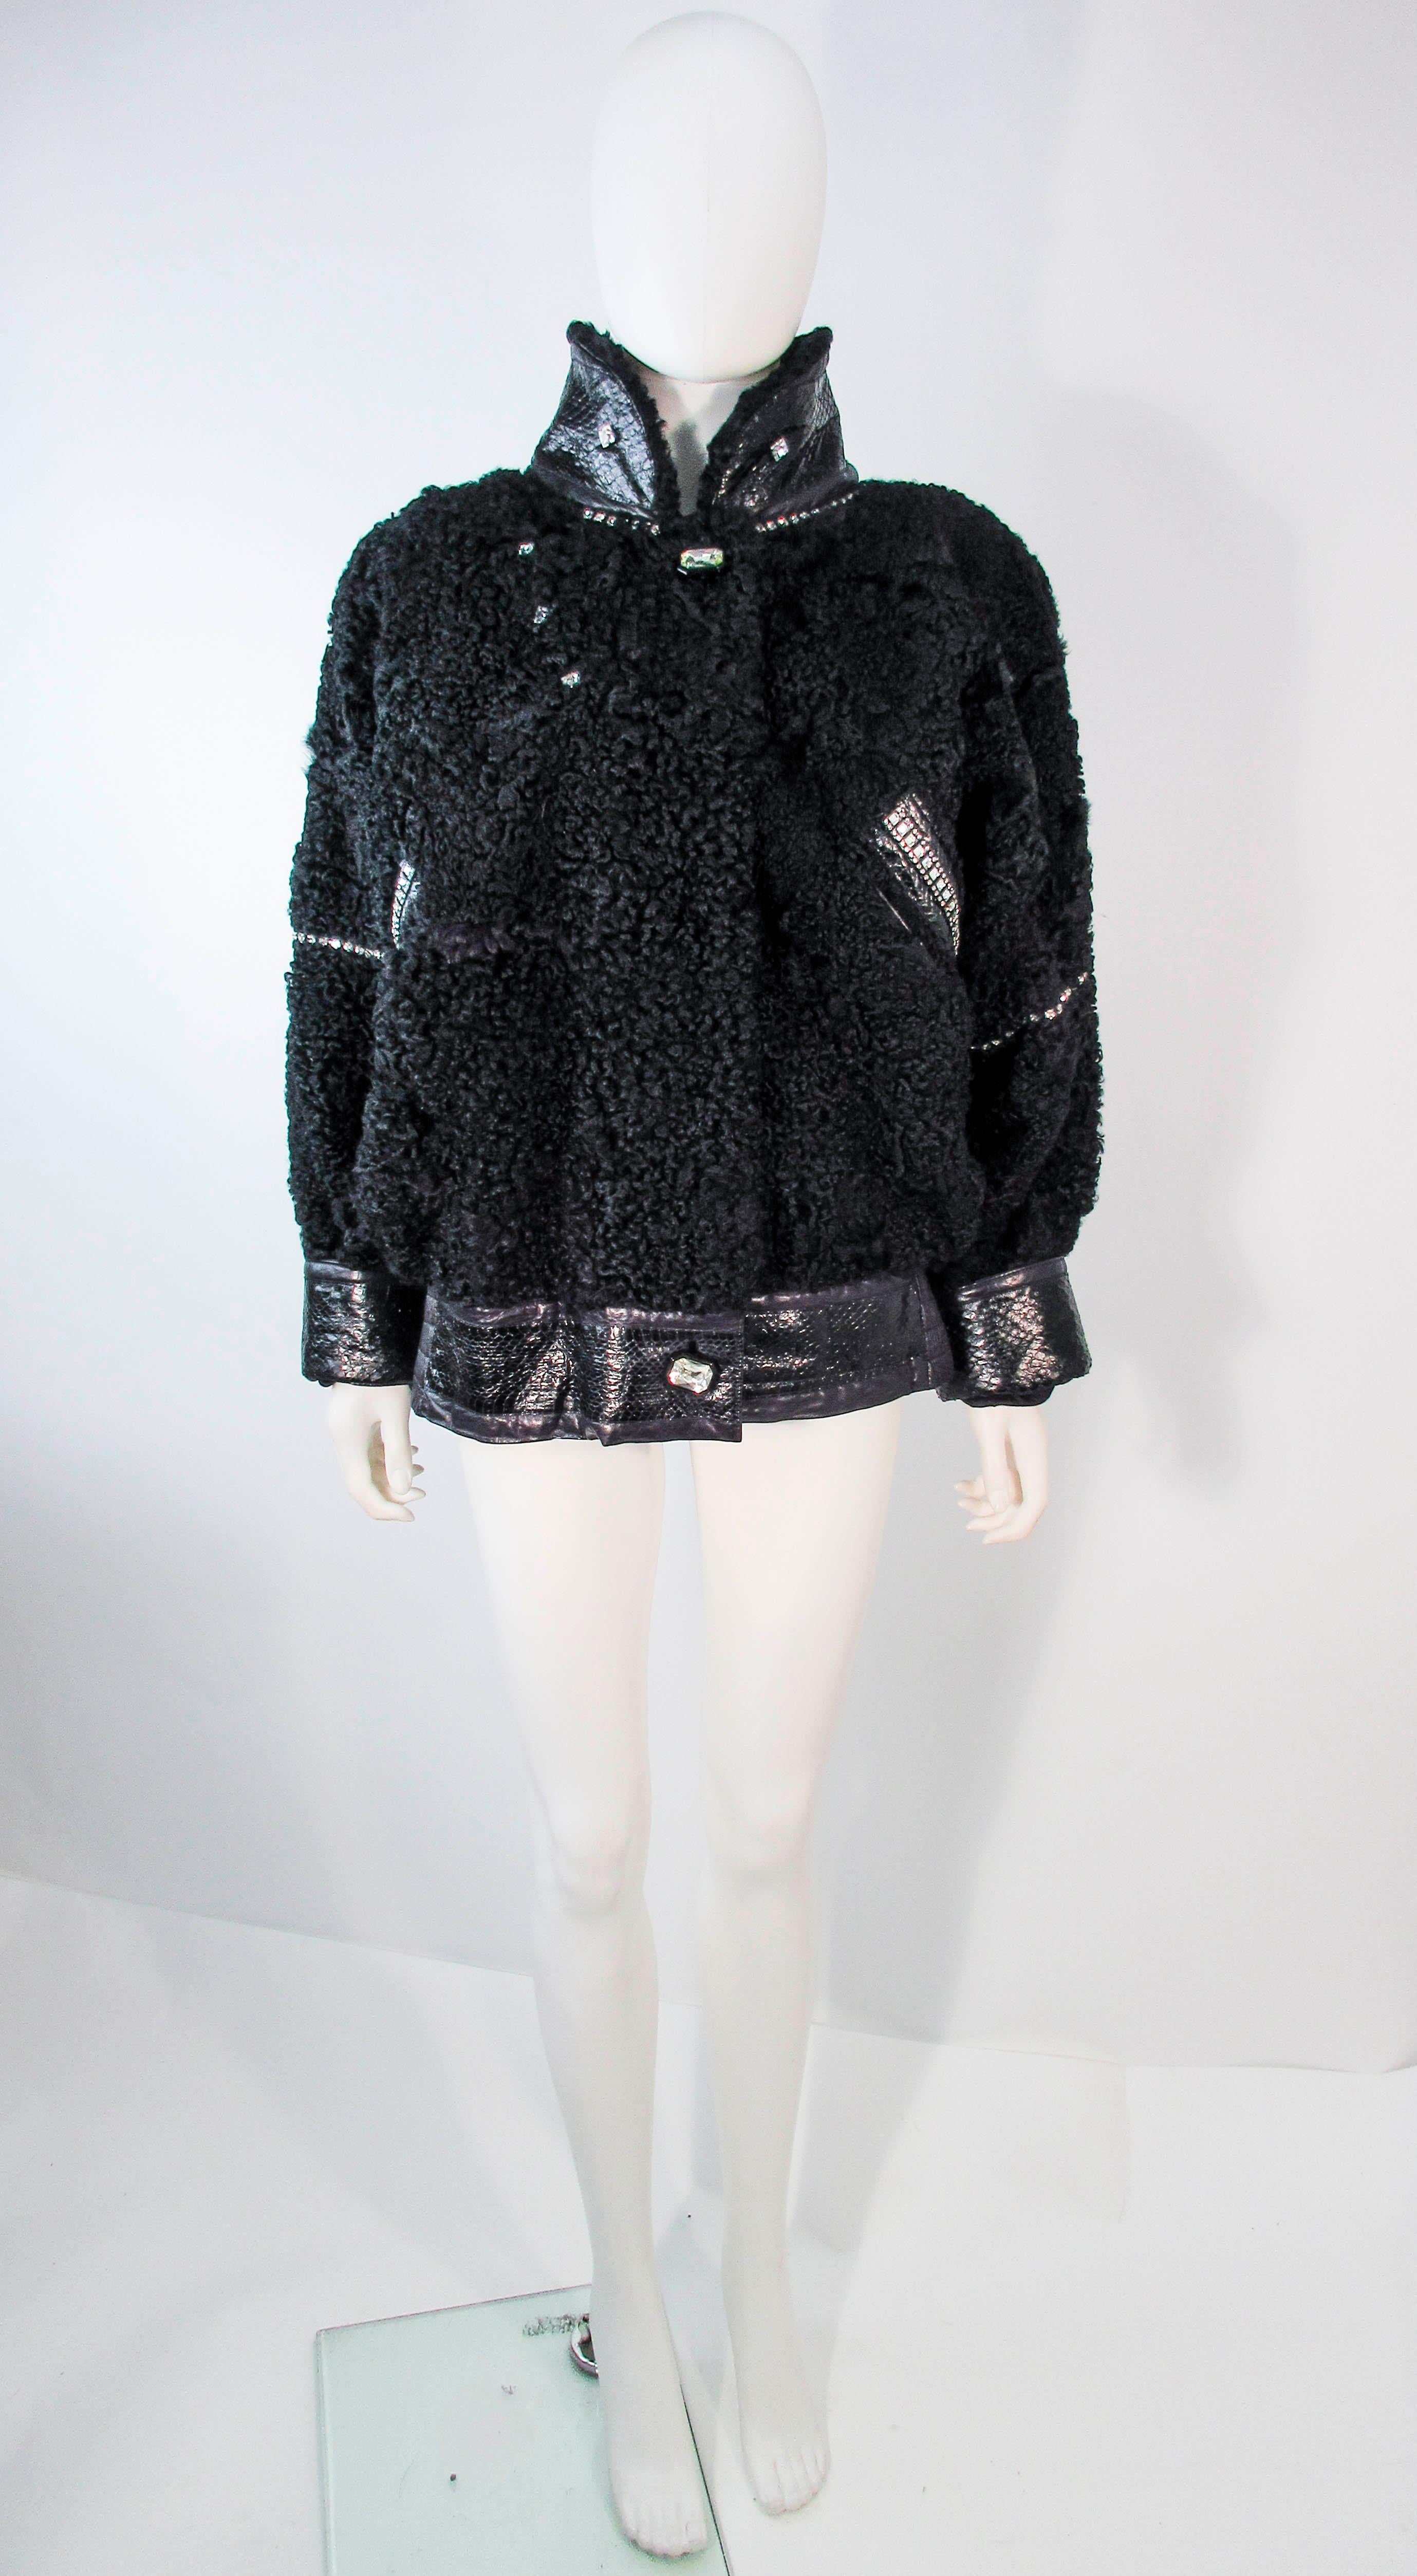 This fabulous jacket is composed of a black lamb jacket, features rhinestones with snakeskin trim. There are side pockets and a center front zipper with rhinestone buttons. In excellent vintage condition, some signs of wear due to age. Please feel